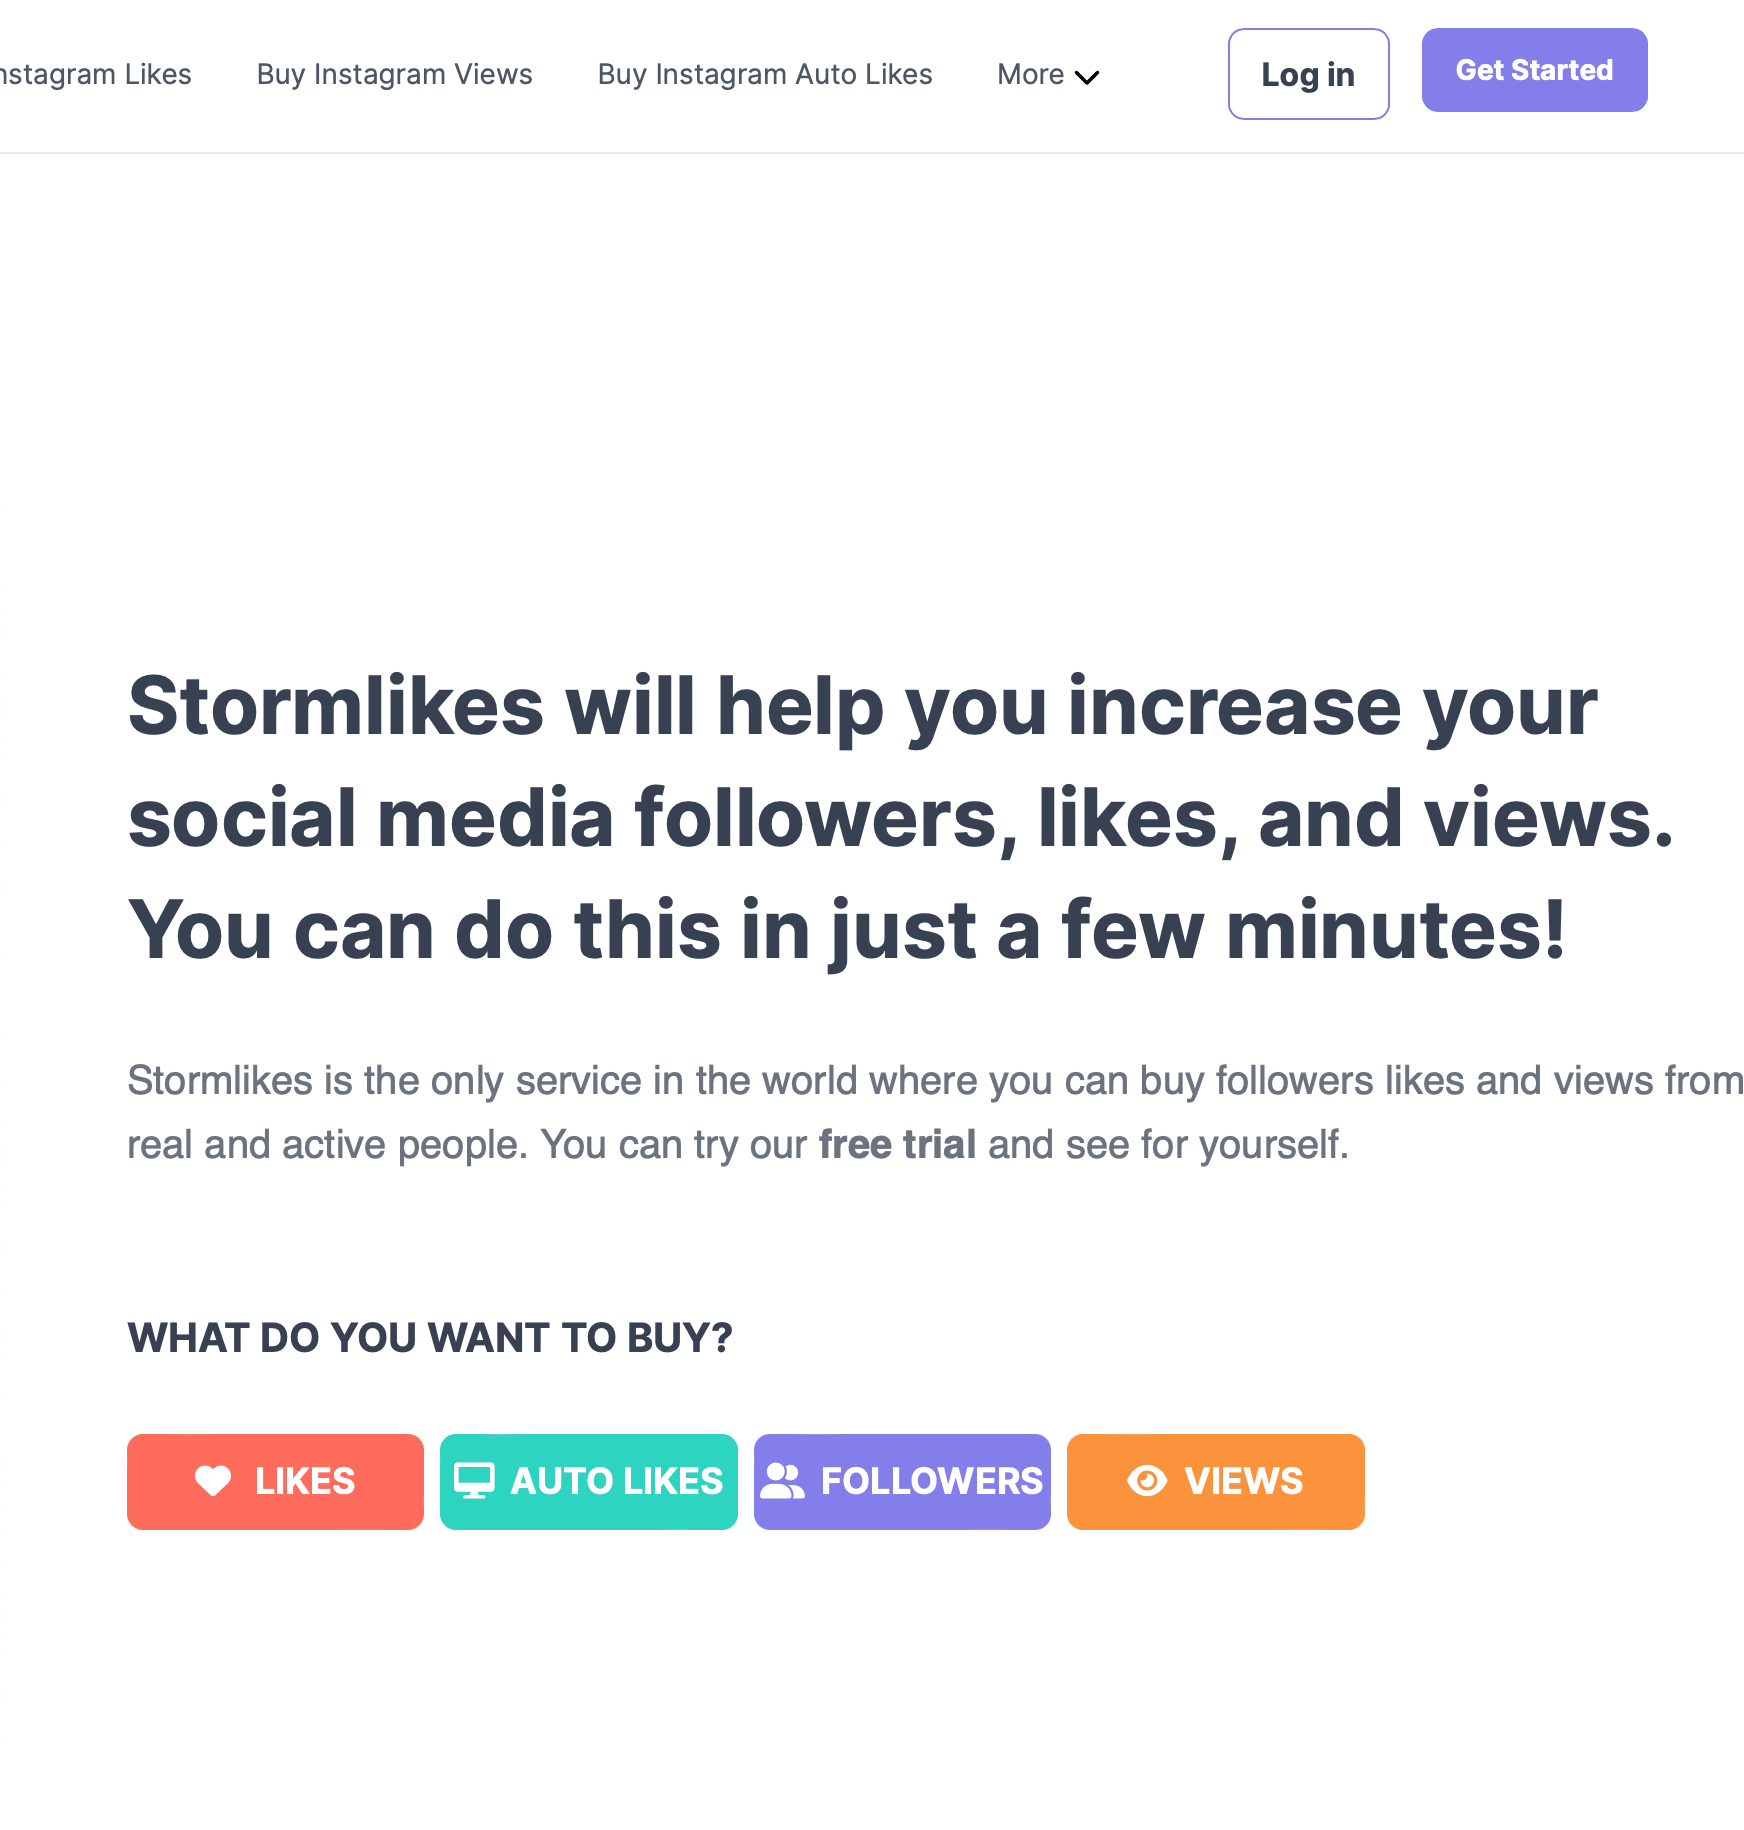 Stormlikes Review: Electric Engagement, or a Stormy Experience?